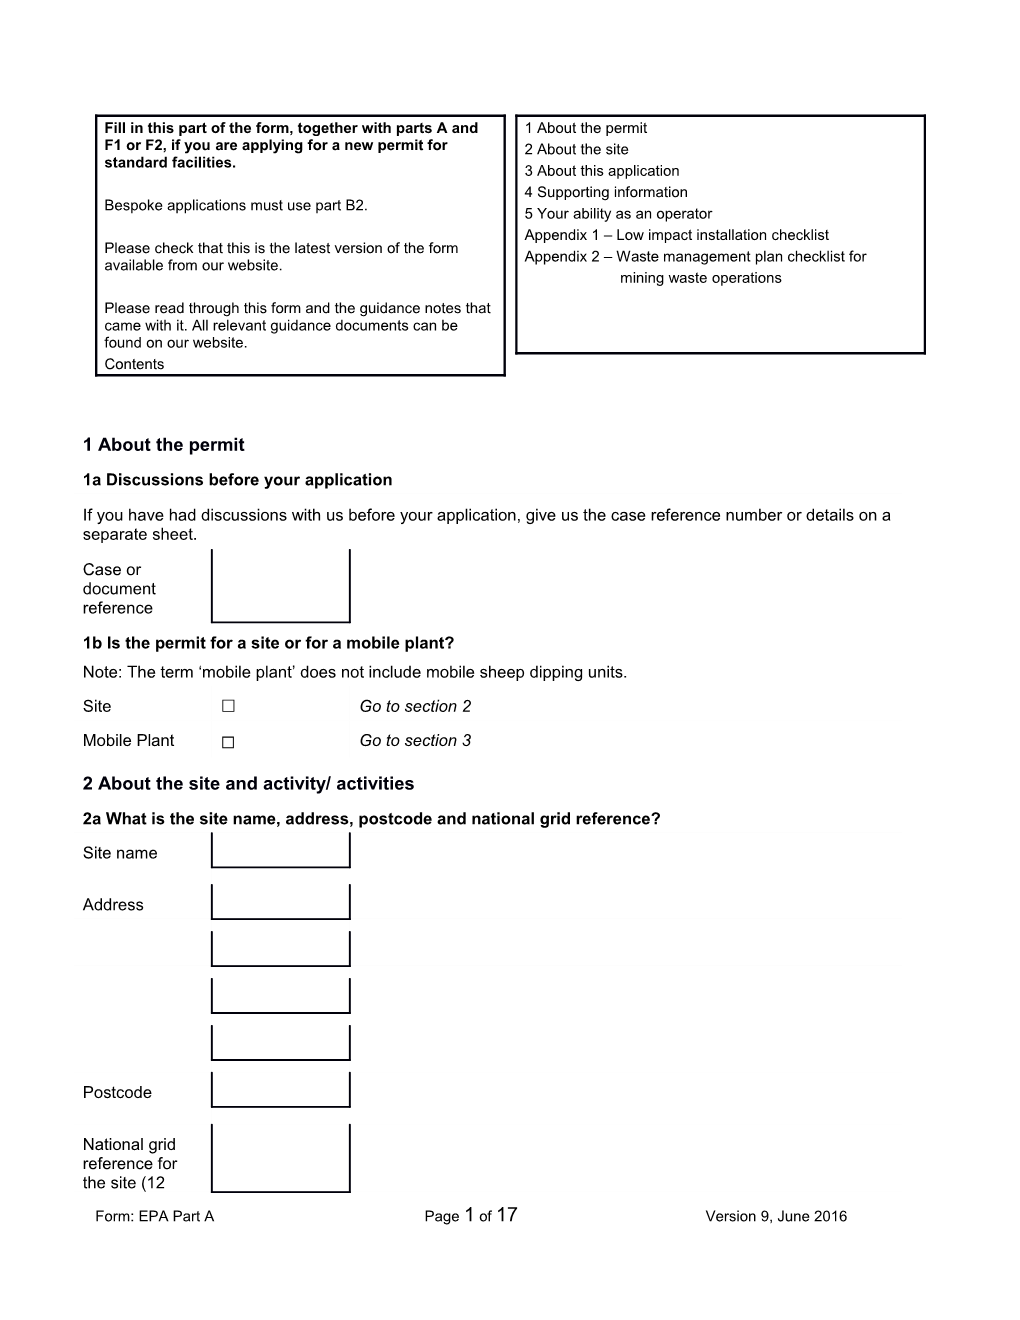 Fill in This Part of the Form, Together with Parts Aand F1 Or F2, If You Are Applying